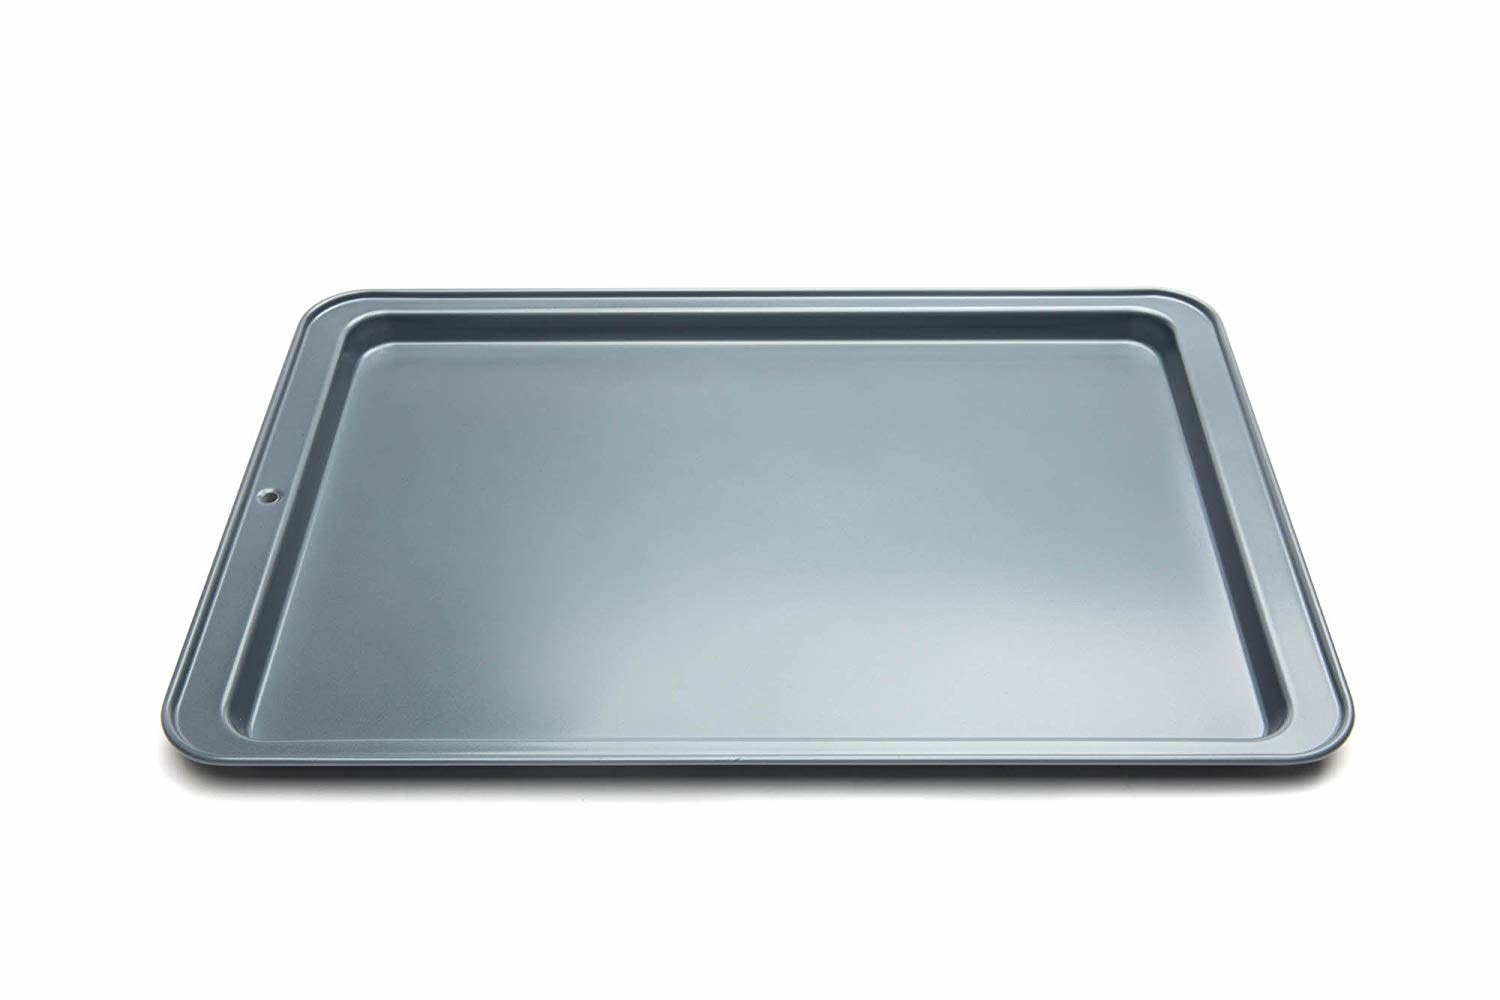 Jelly Roll Pan (Fits 8 Cookies) Stainless-Steel